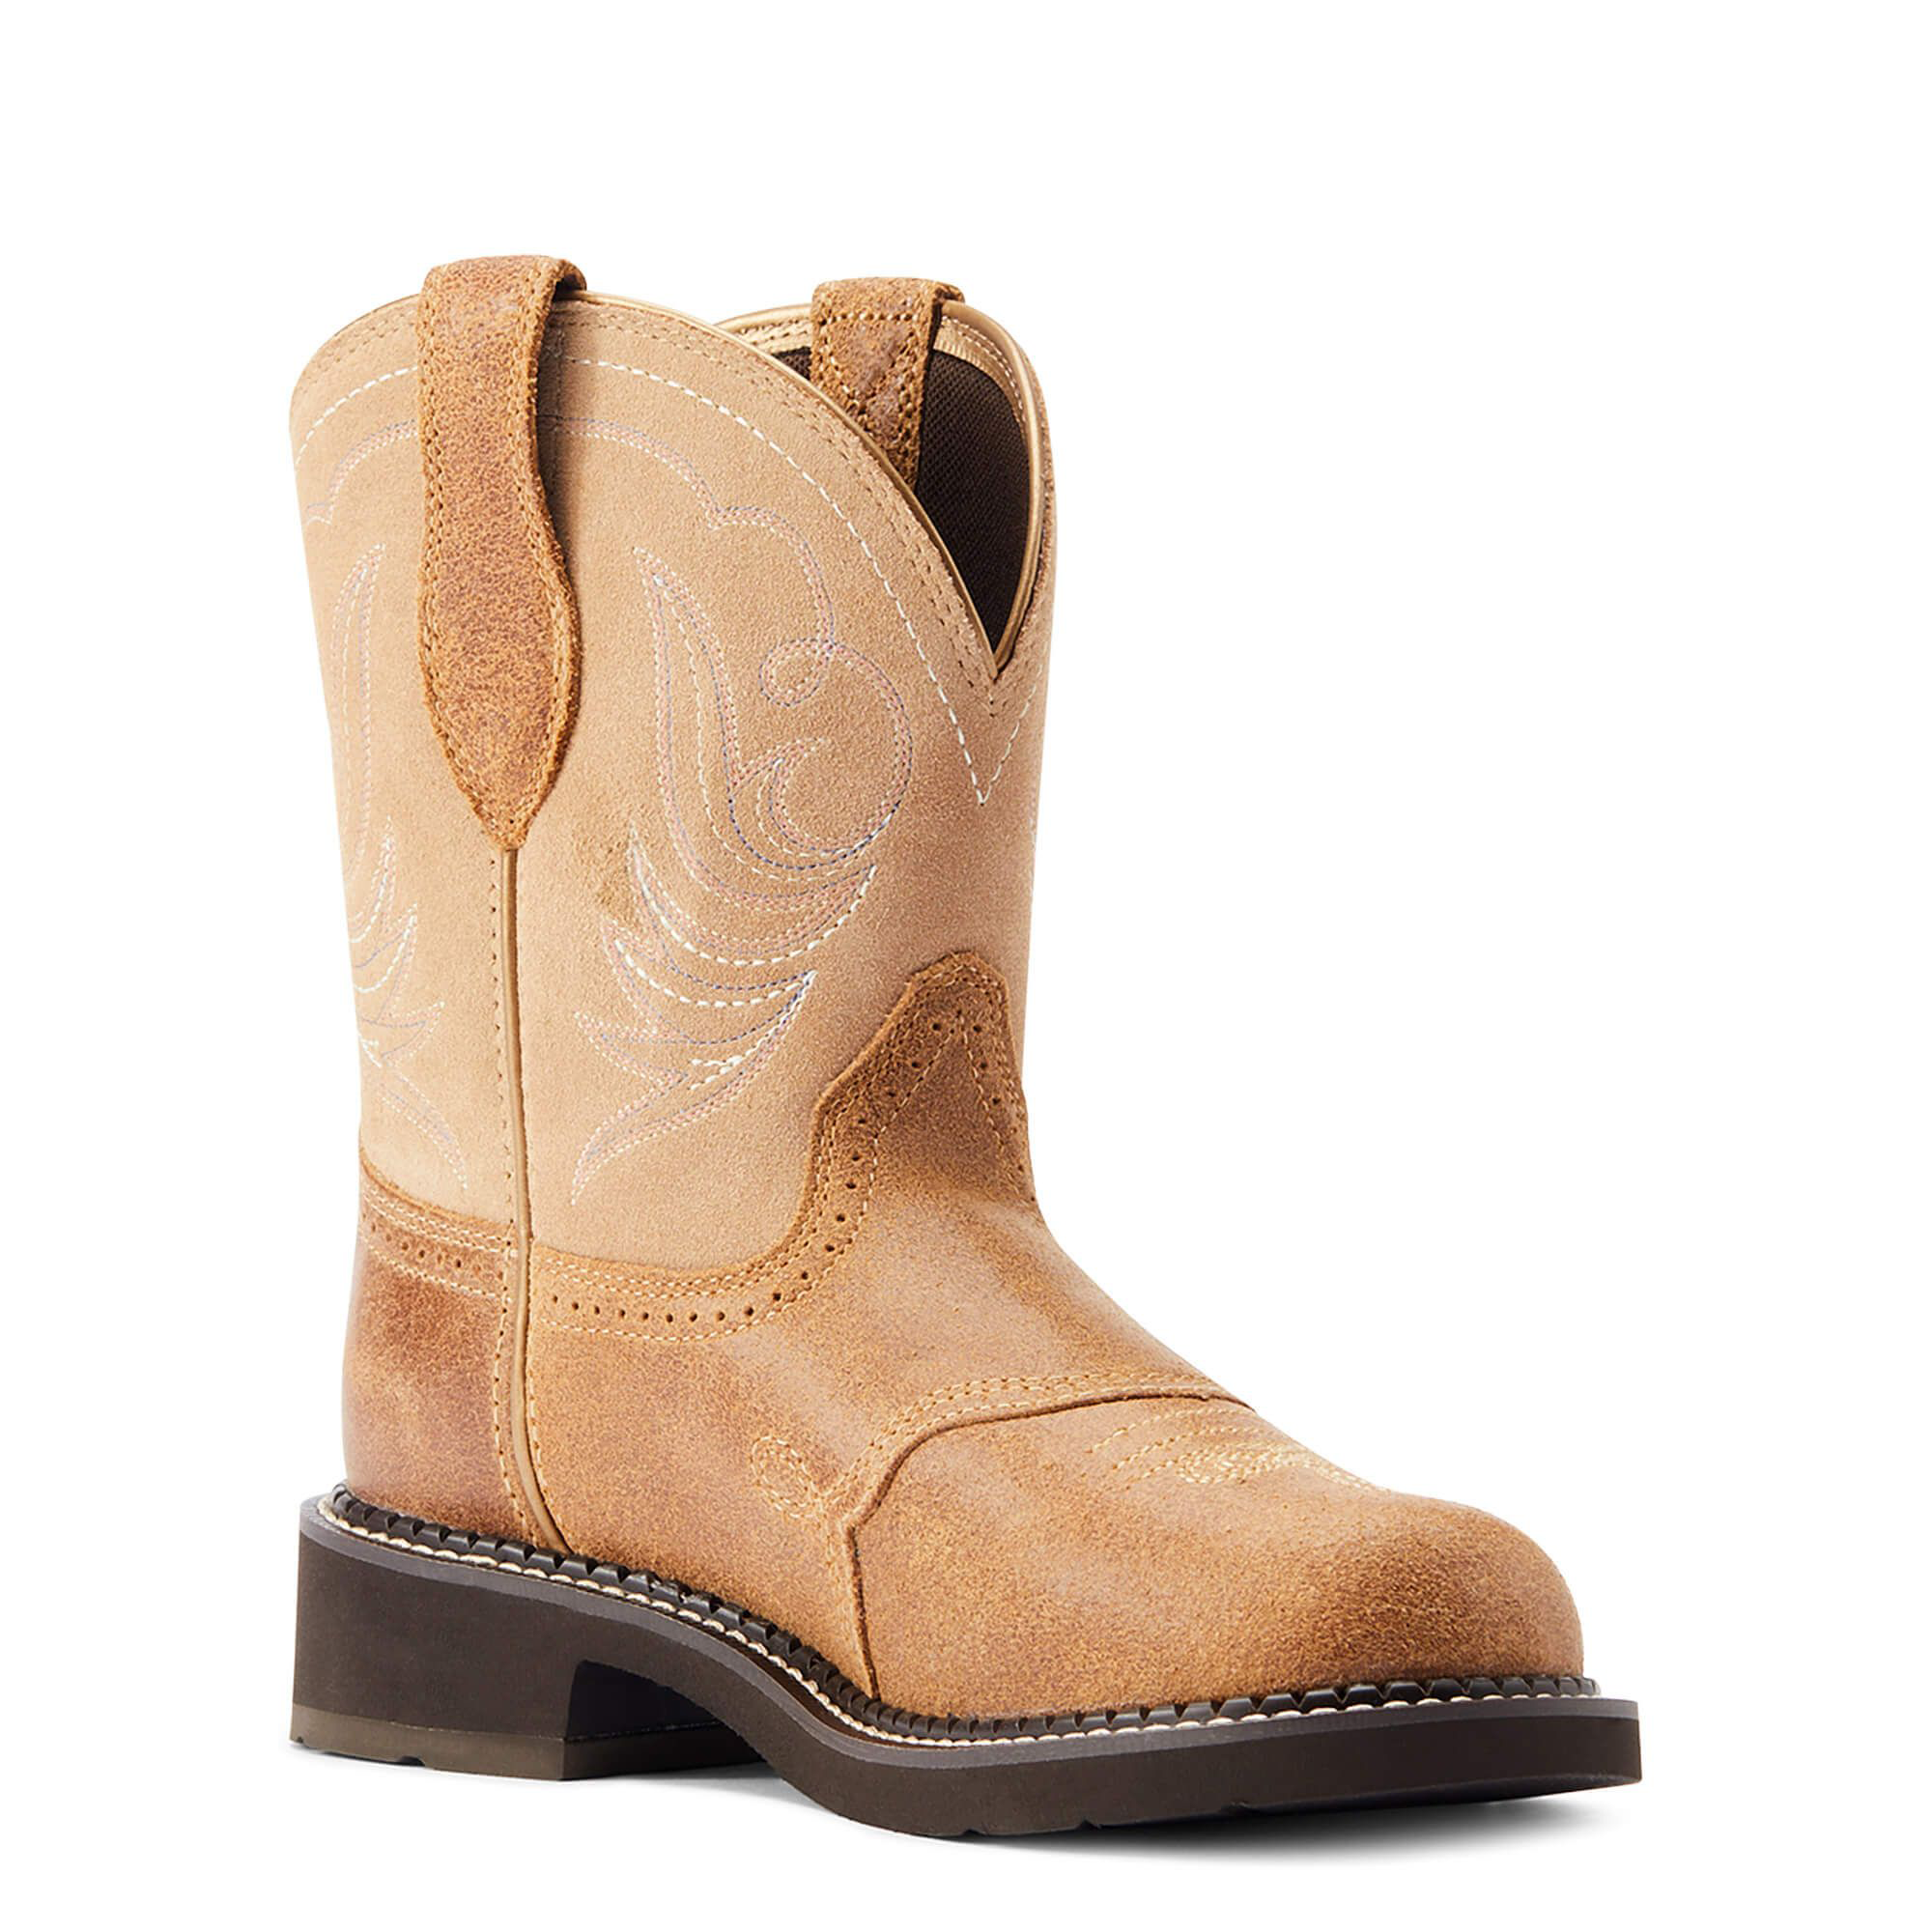 Ariat Fatbaby Heritage Dapper Western Boots for Ladies